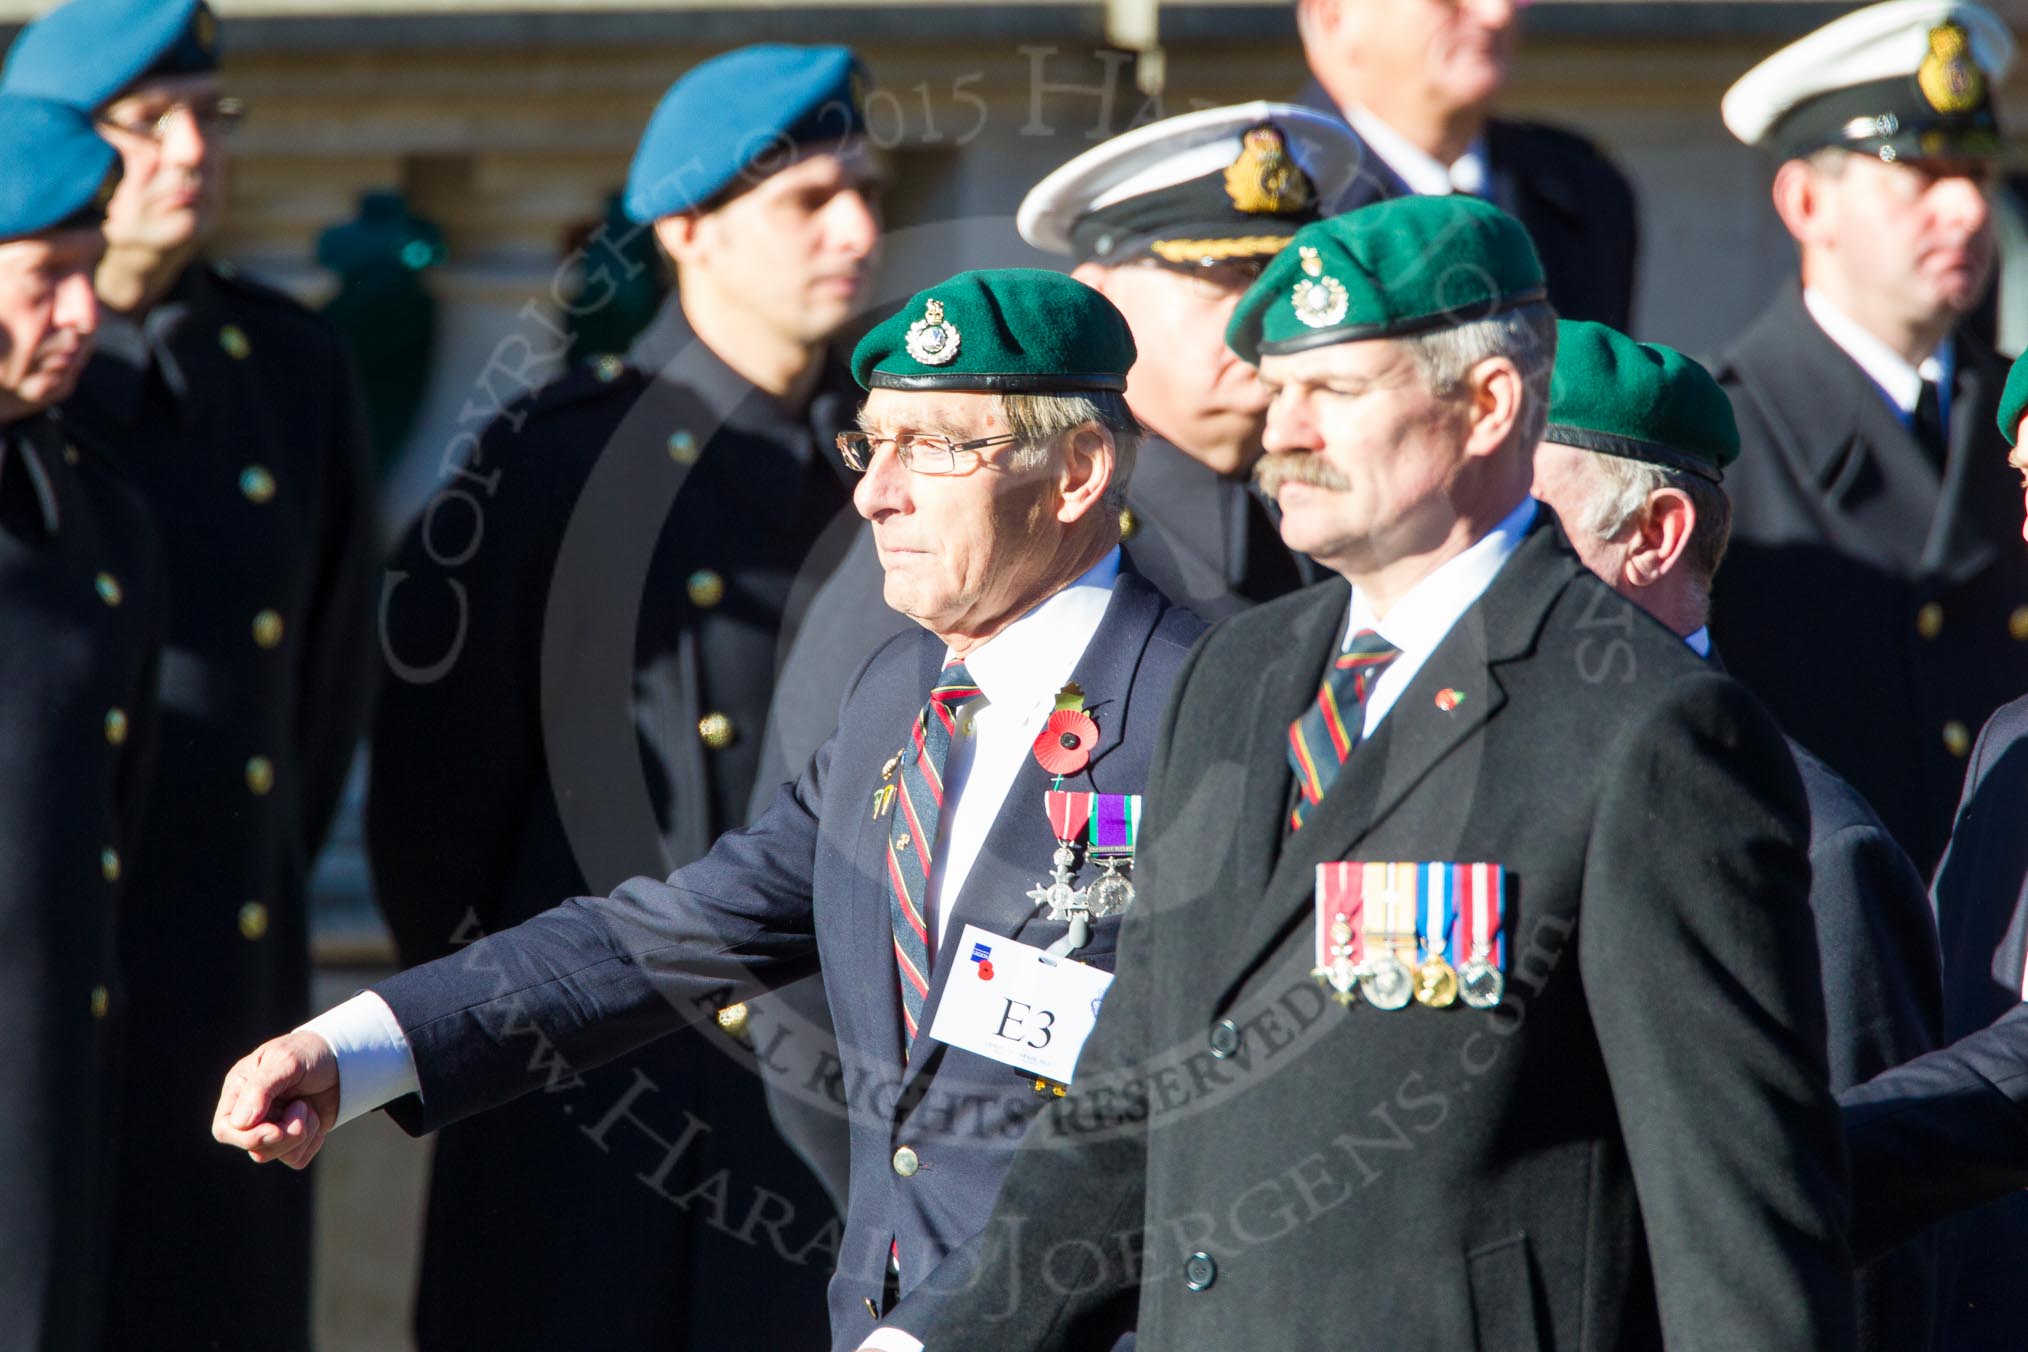 Remembrance Sunday Cenotaph March Past 2013: E3 - Royal Marines Association..
Press stand opposite the Foreign Office building, Whitehall, London SW1,
London,
Greater London,
United Kingdom,
on 10 November 2013 at 11:44, image #371